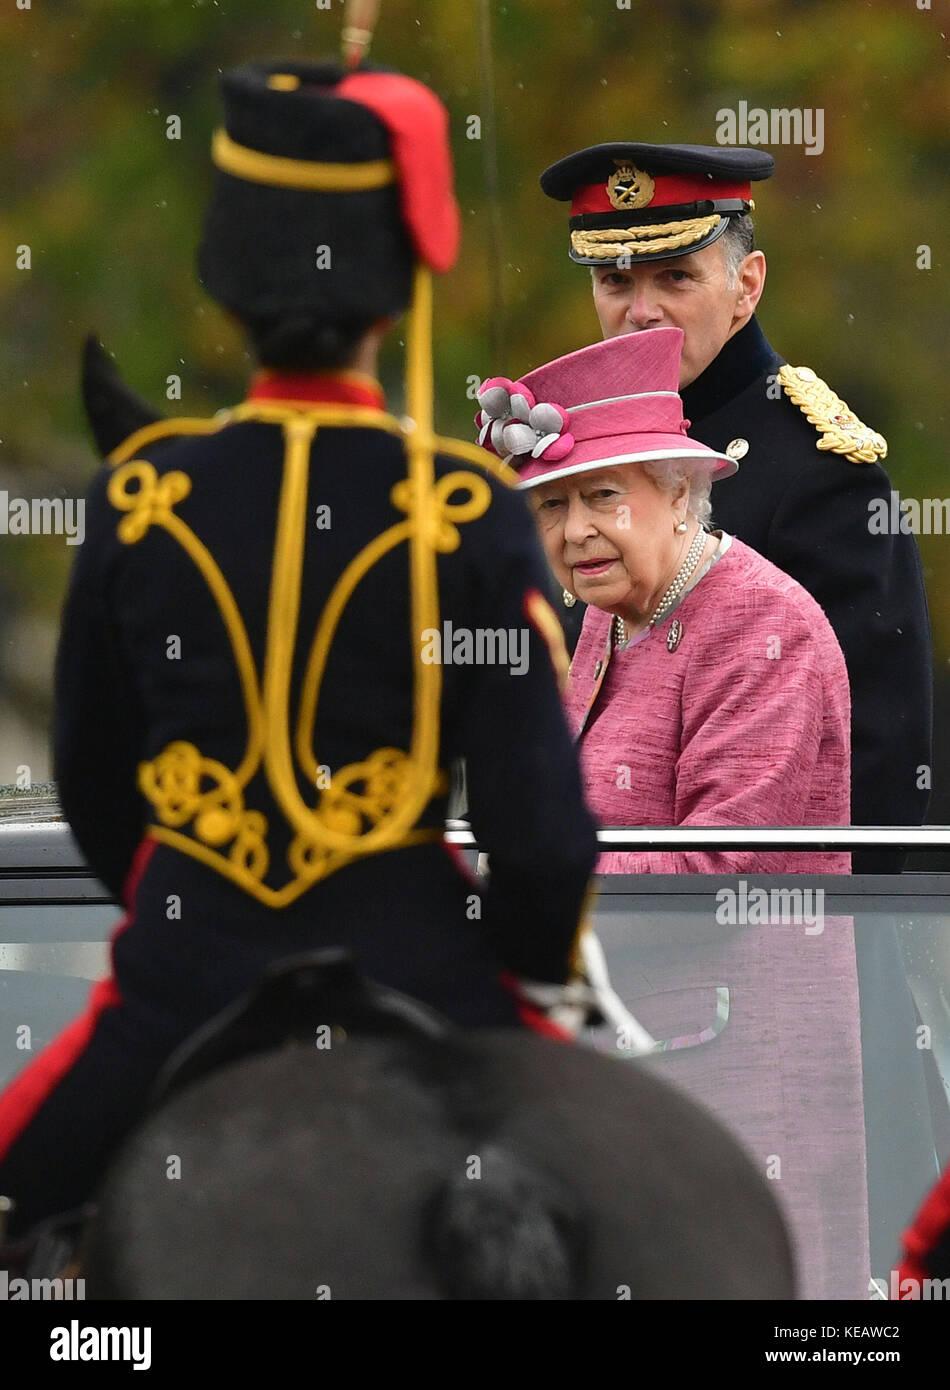 Queen Elizabeth II arrives in Hyde Park in London, to mark the 70th anniversary of the King's Troop Royal Horse Artillery. Stock Photo